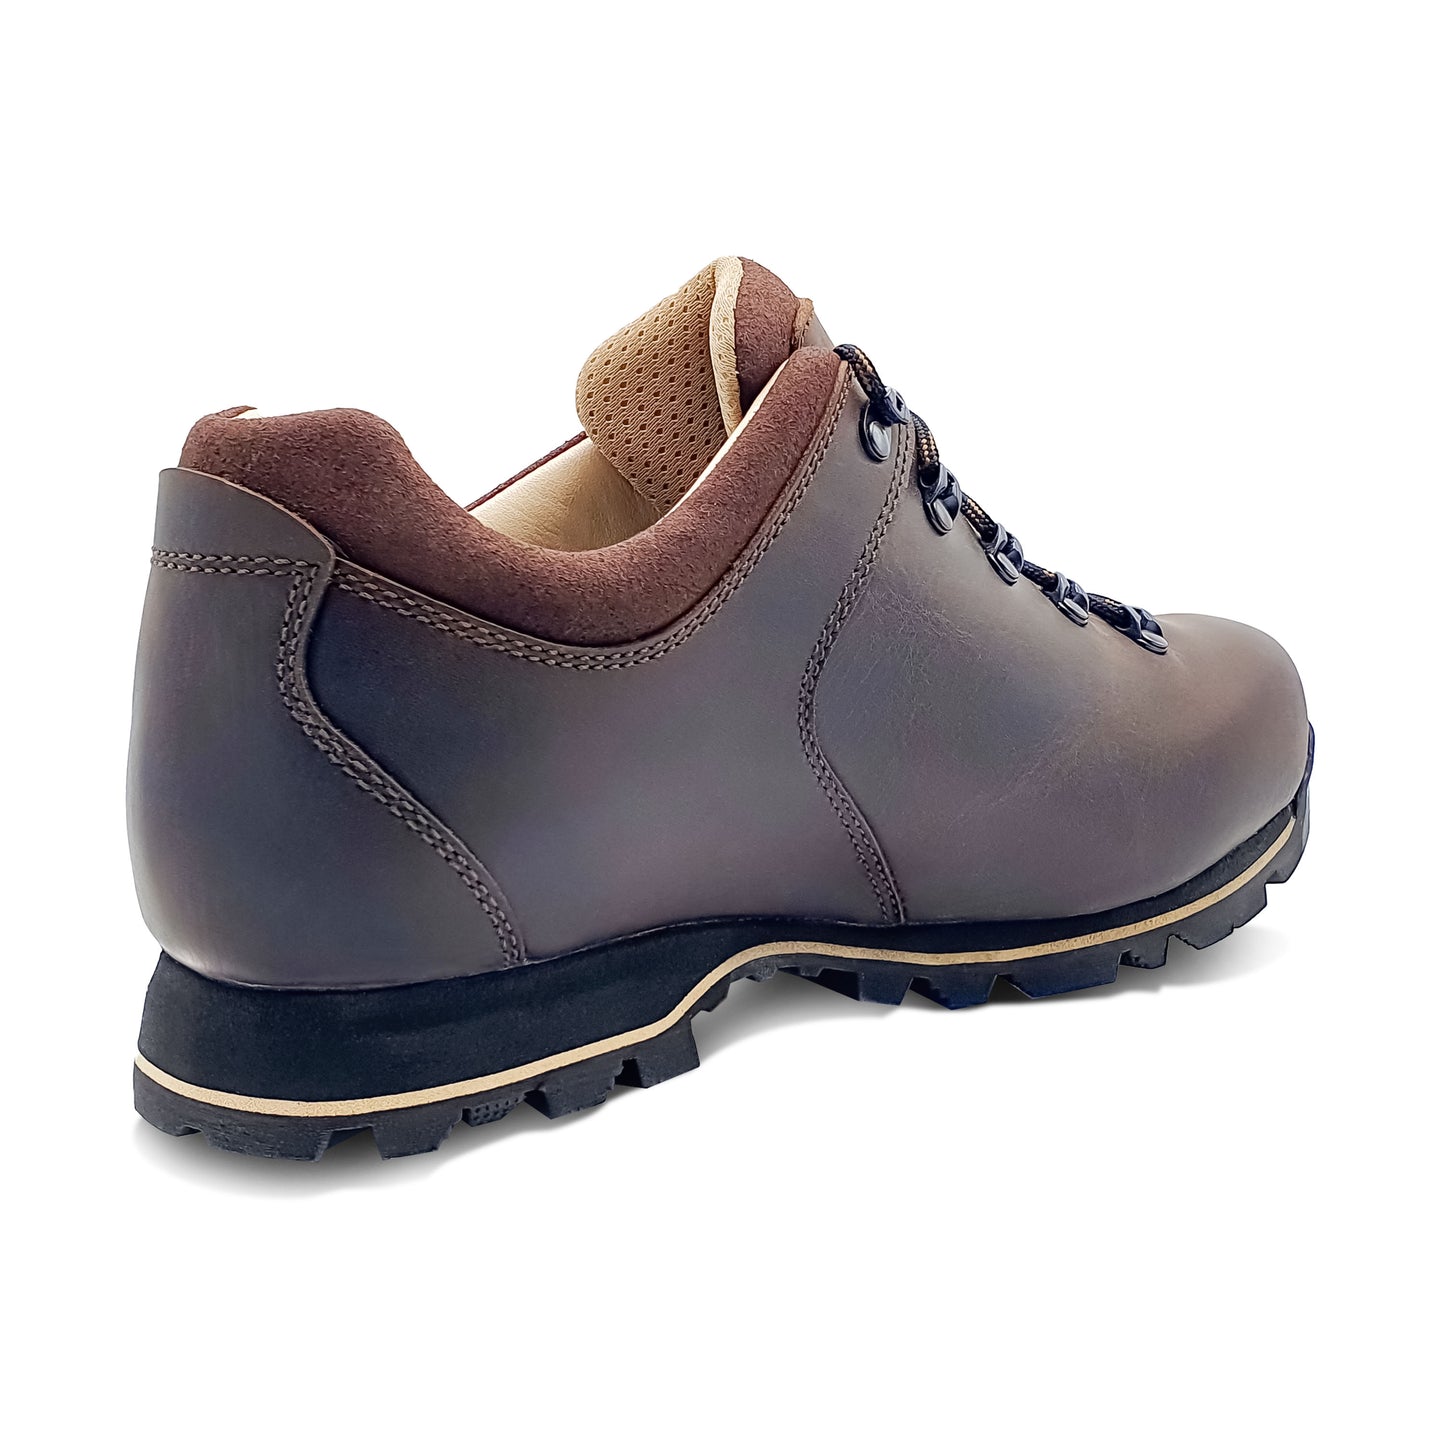 ANATOM Q1 Braemar Walking Shoe with Vibram outsole - PRE-ORDERS FOR SPRING NOW CLOSED. NEXT AVAILABLE DELIVERY AUTUMN 24